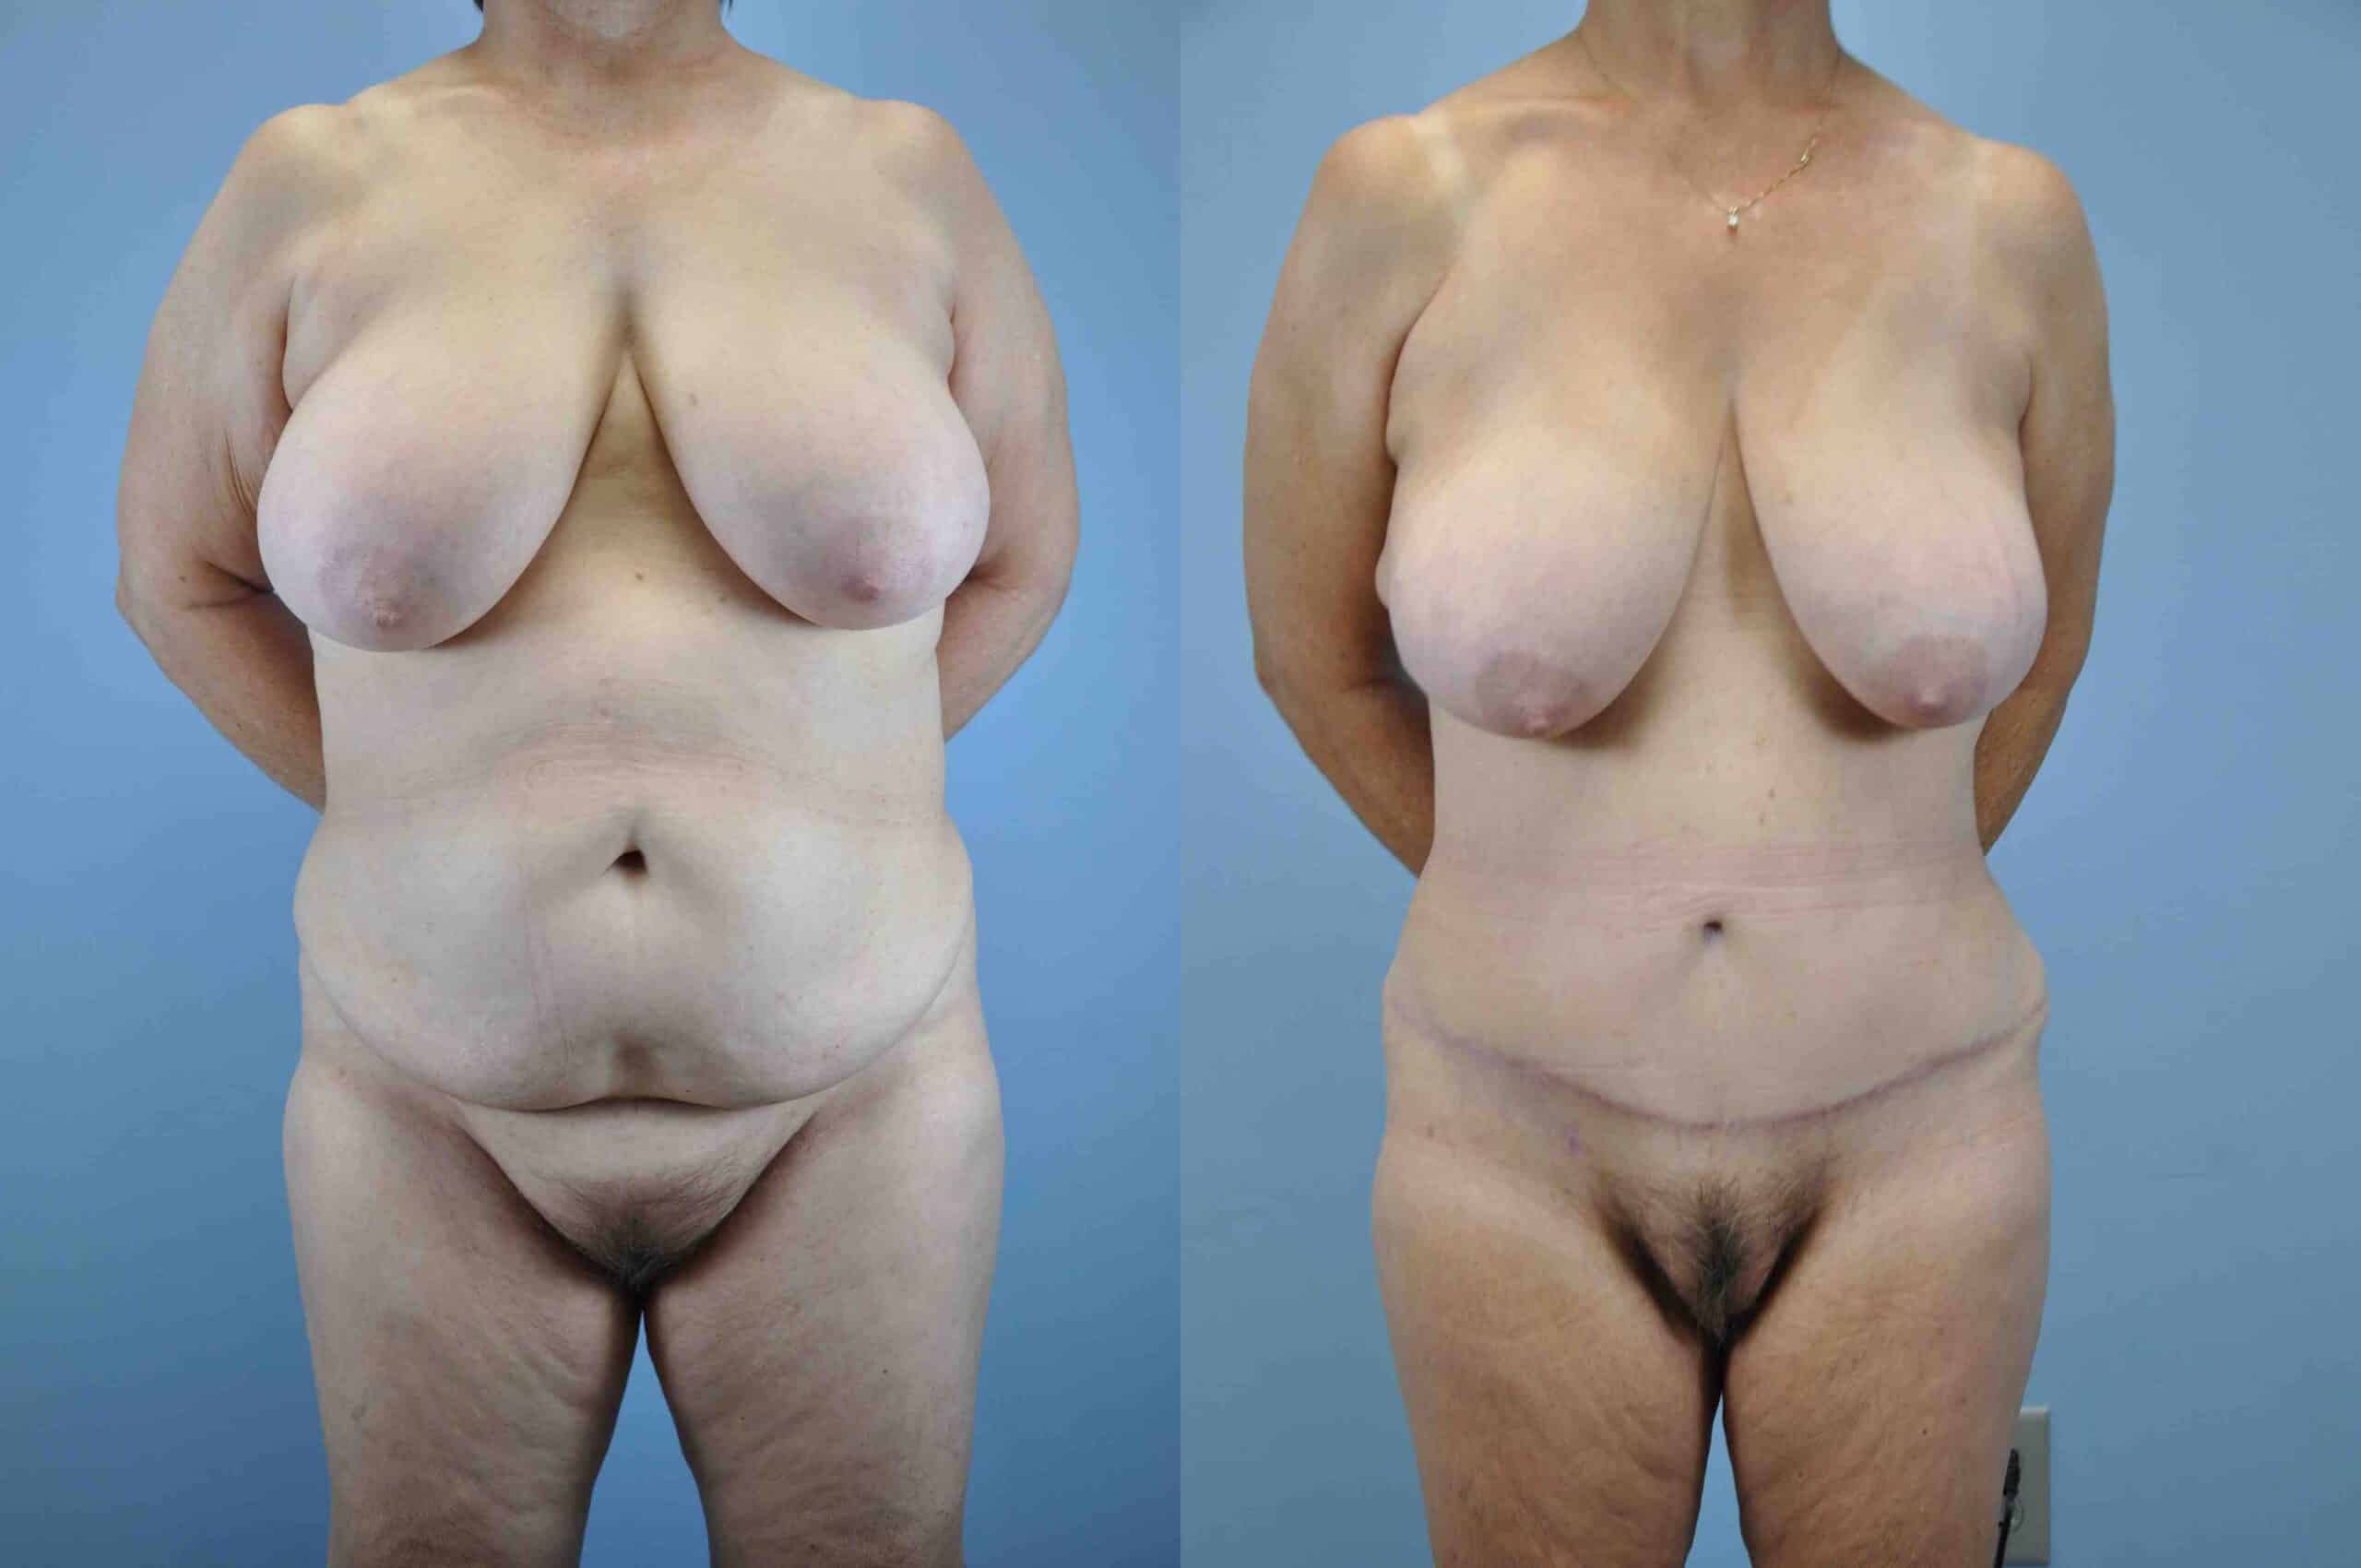 Before and after, patient 6 mo post op from VASER Abdomen, Flanks, Mons, Tummy Tuck procedures performed by Dr. Paul Vanek